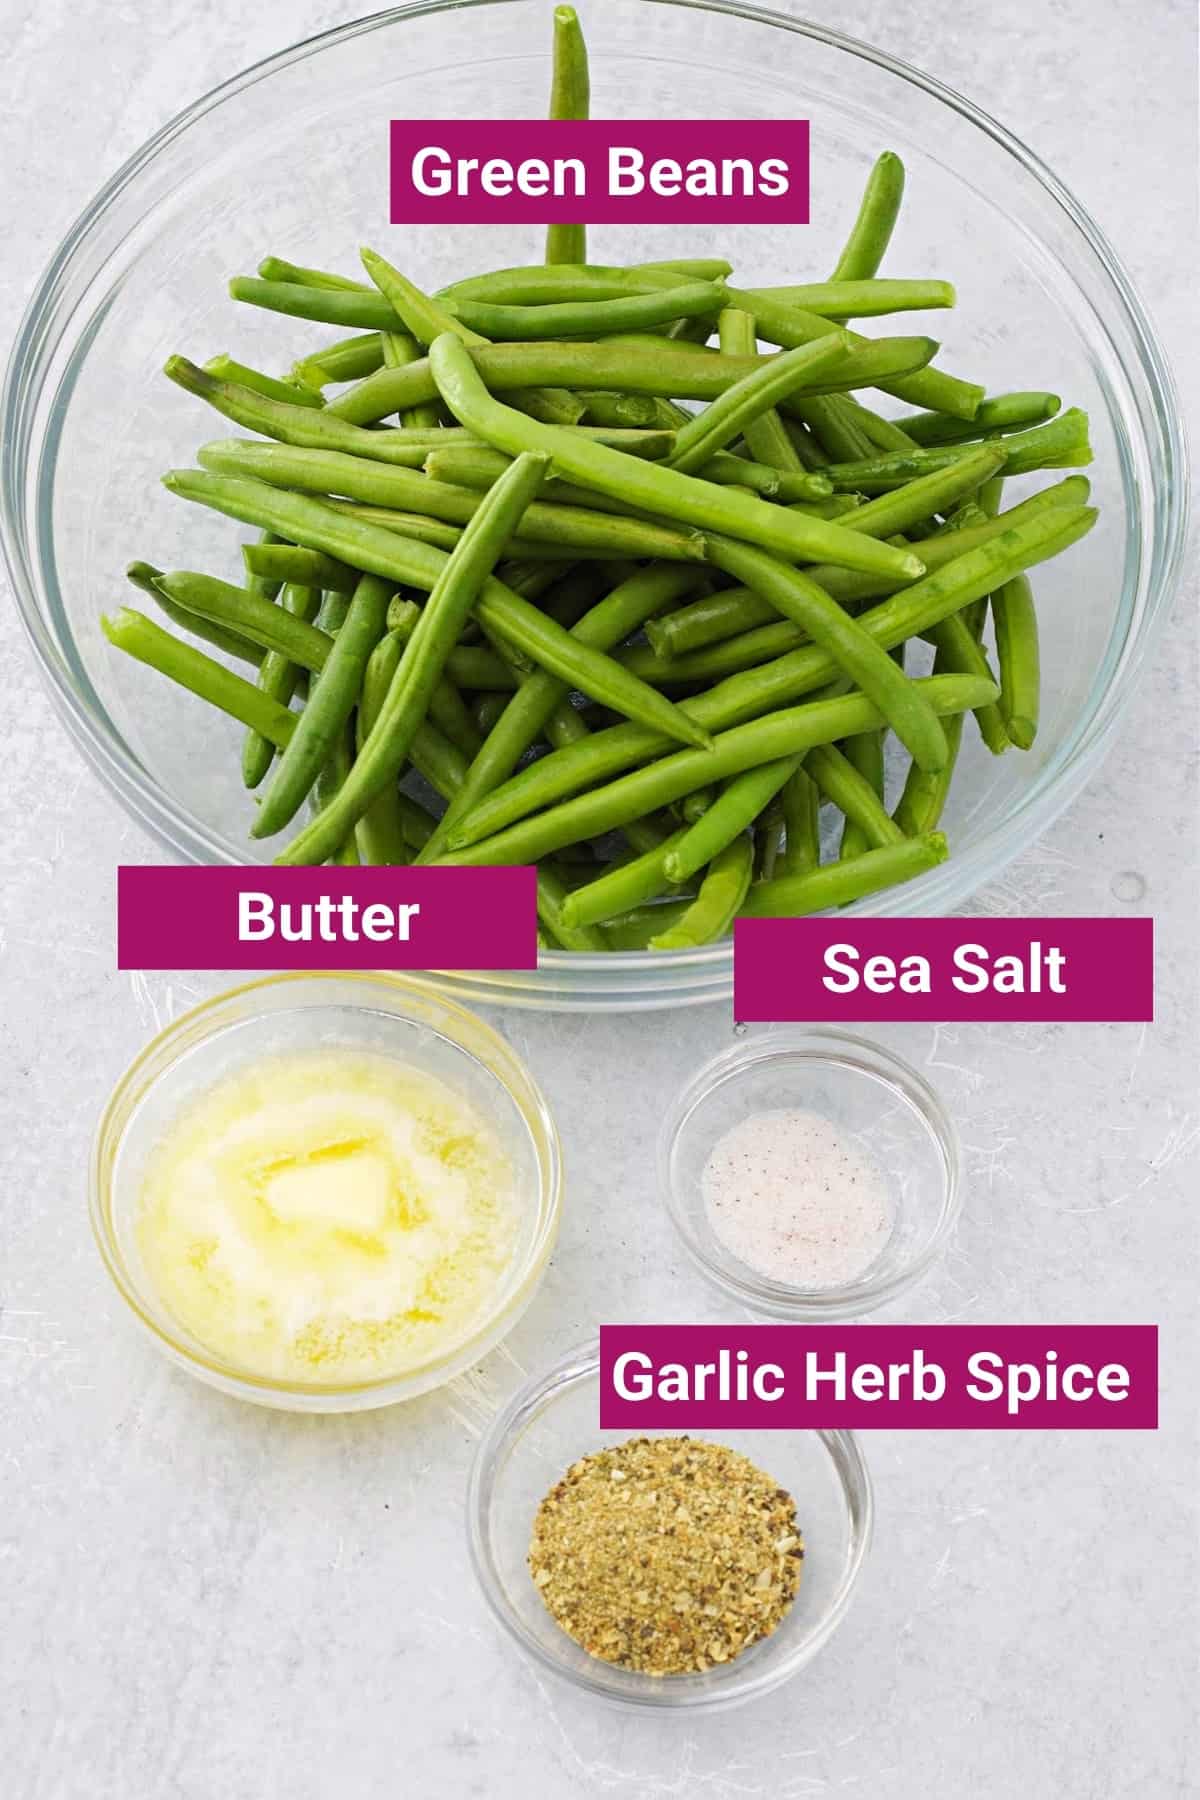 ingredients needed to make air fryer green beans: fresh trimmed green beans, melted butter, sea salt, and garlic and herb seasoning in separate bowls